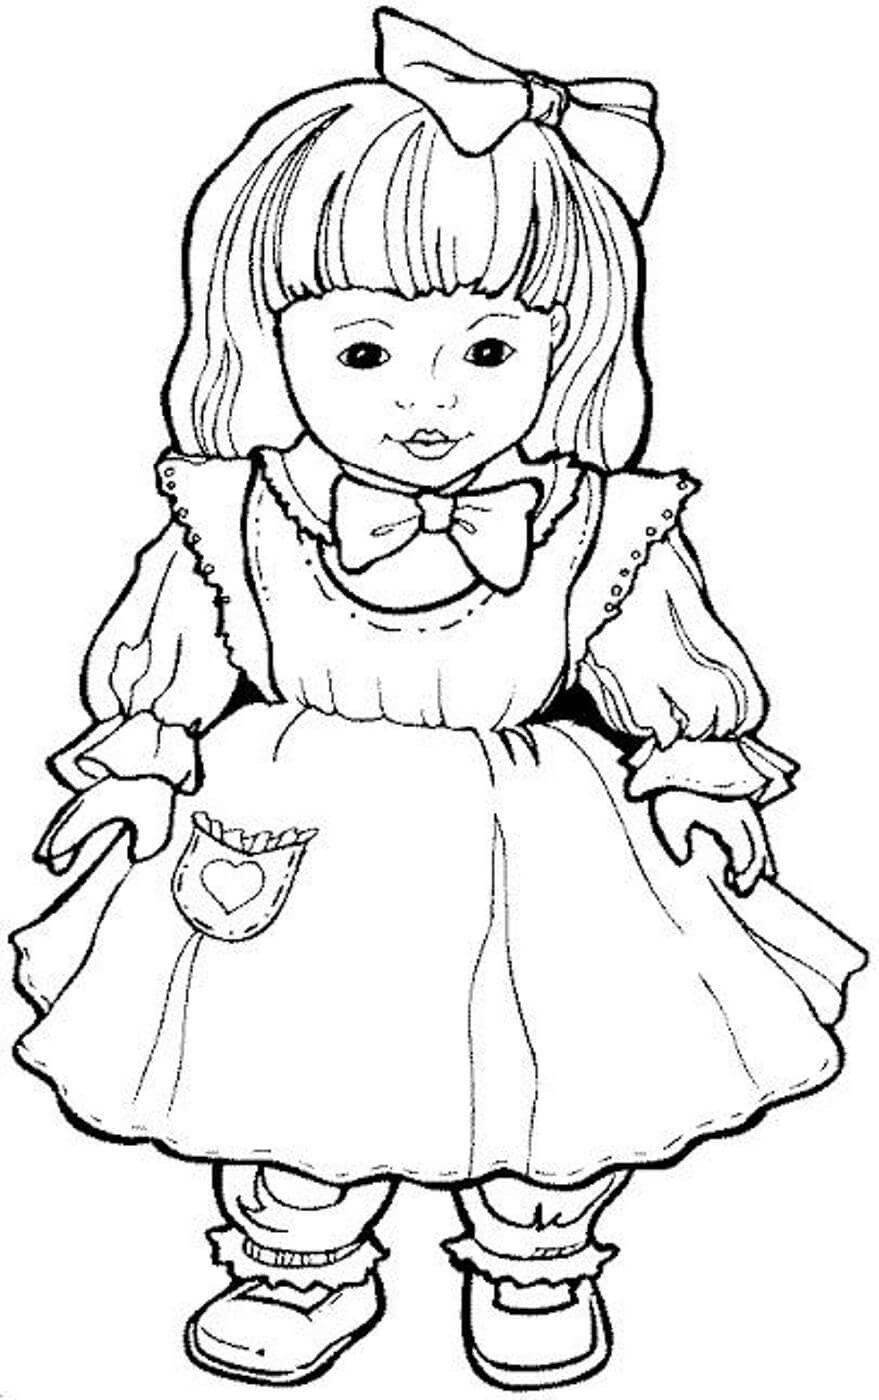 American Girls Coloring Pages
 Coloring Pages American Girl Dolls Coloring Pages For